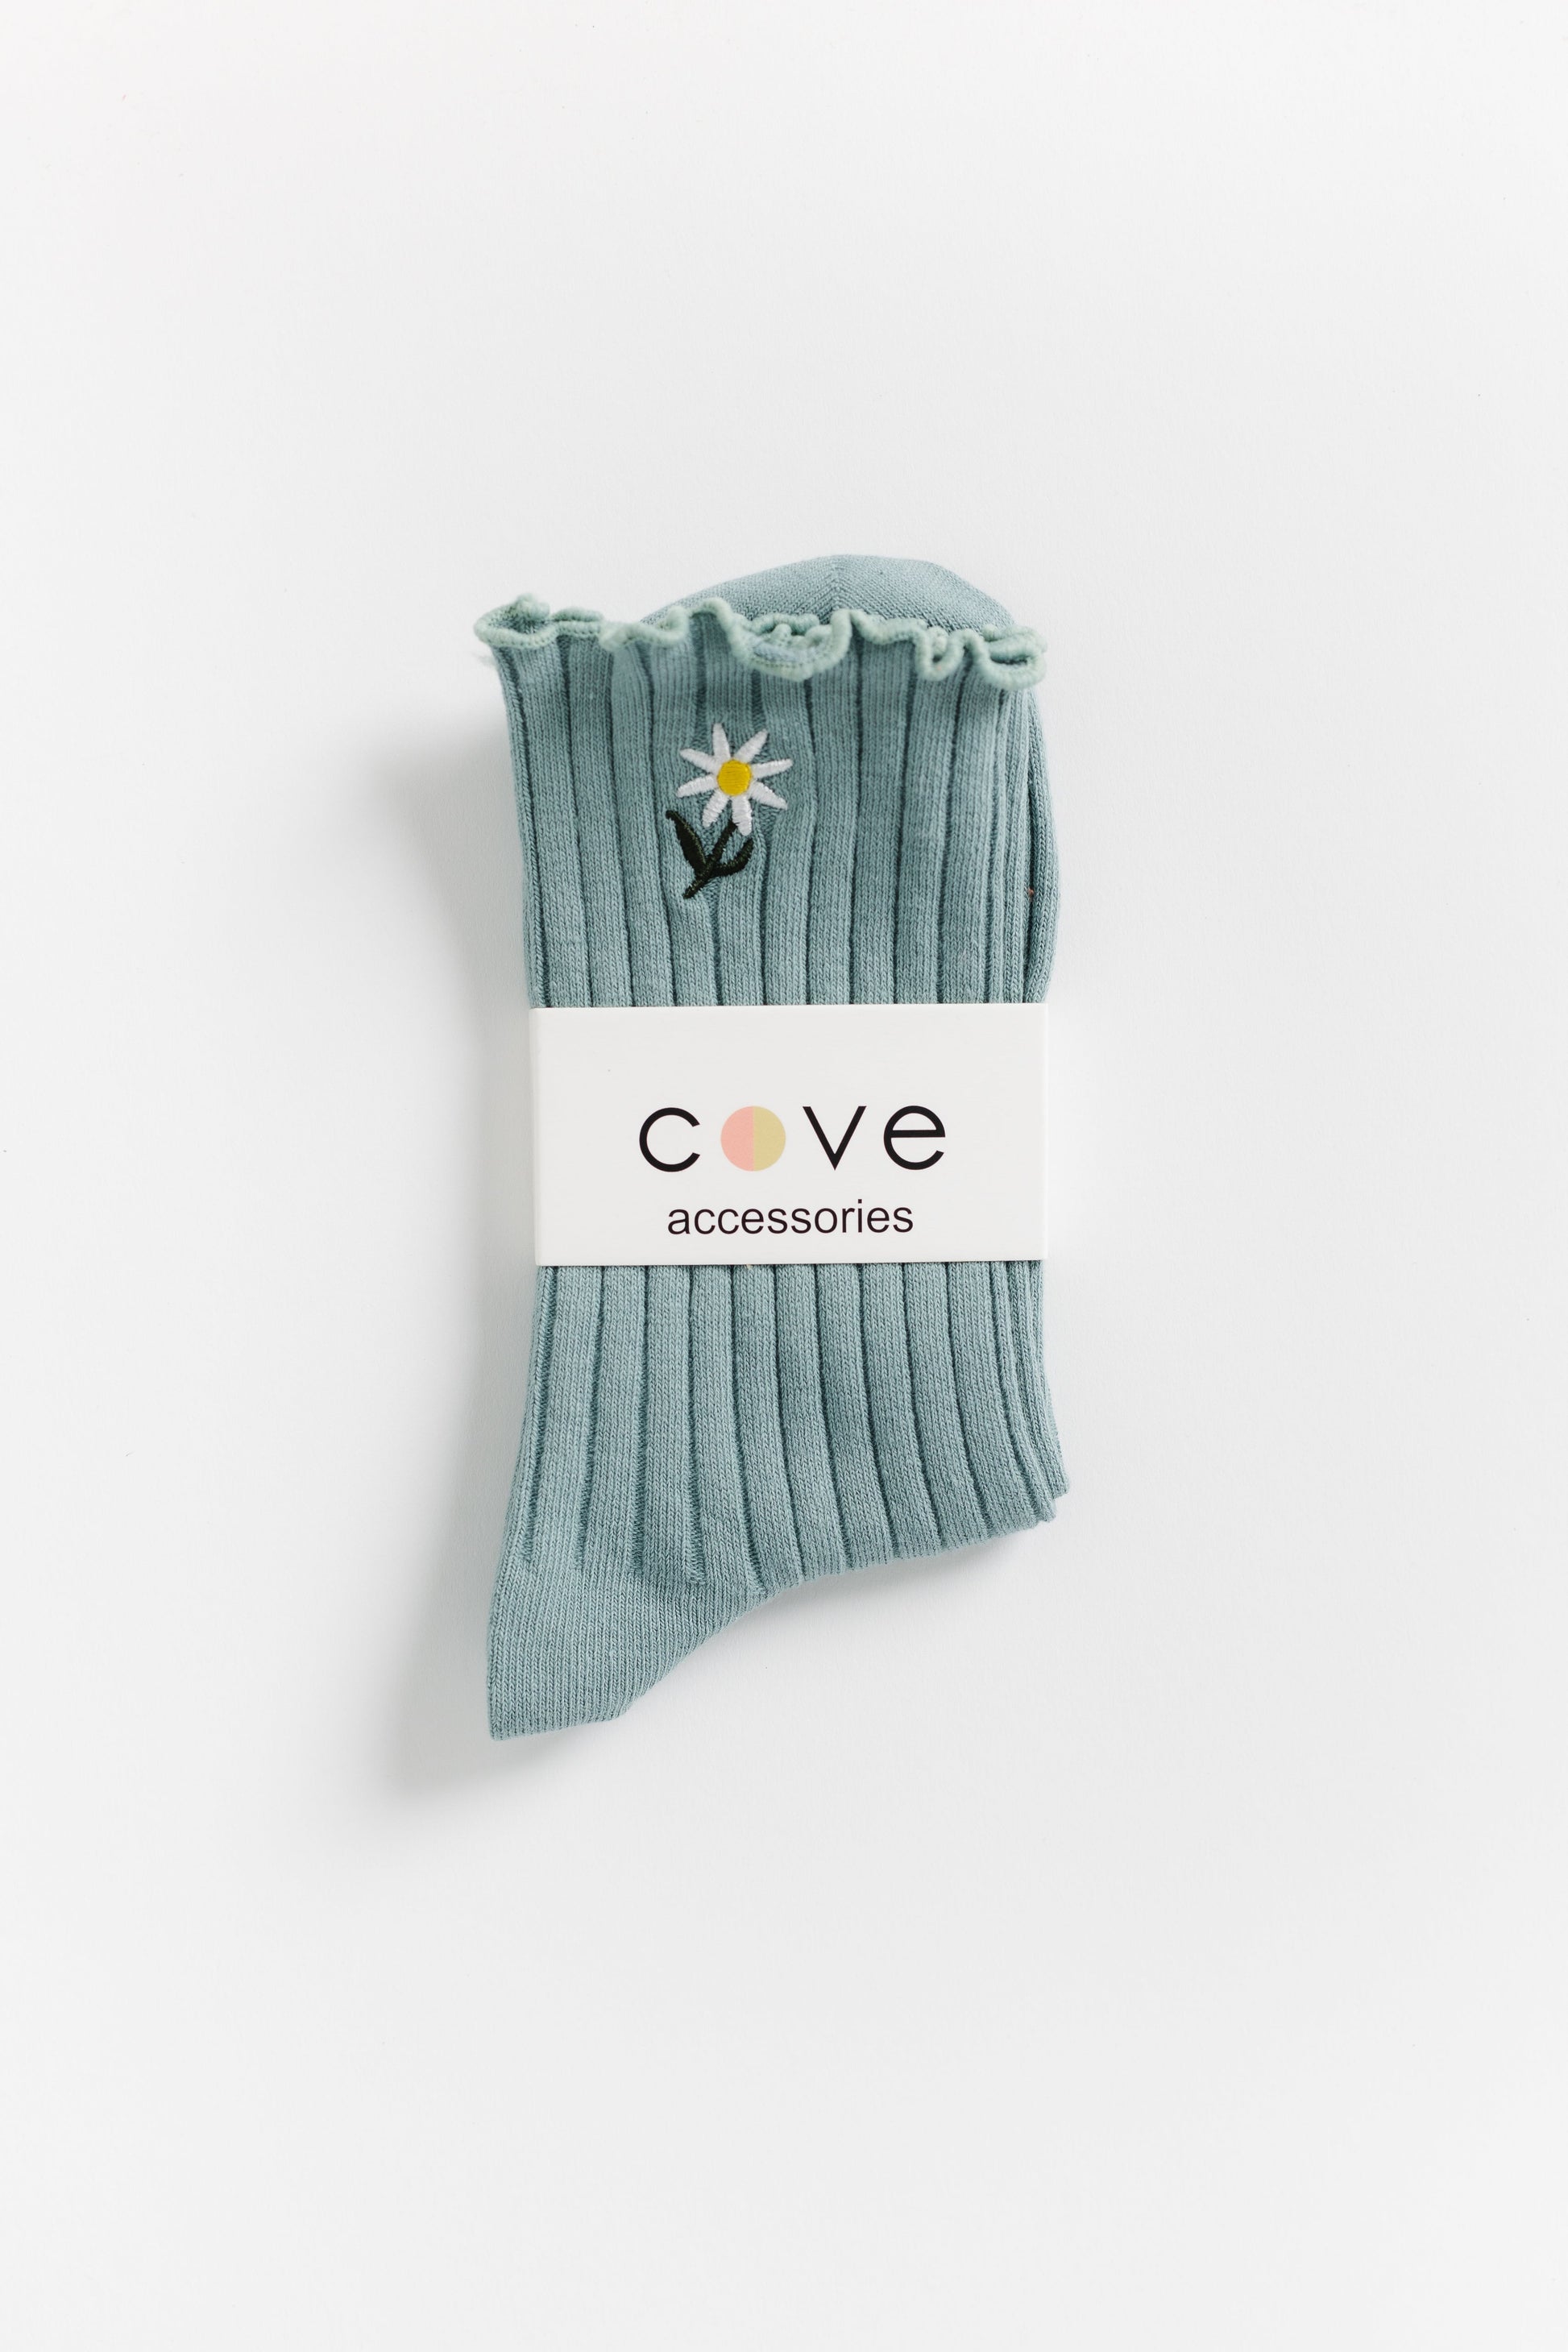 In The Valley Embroidered Sock WOMEN'S SOCKS Cove Accessories Seafoam OS 